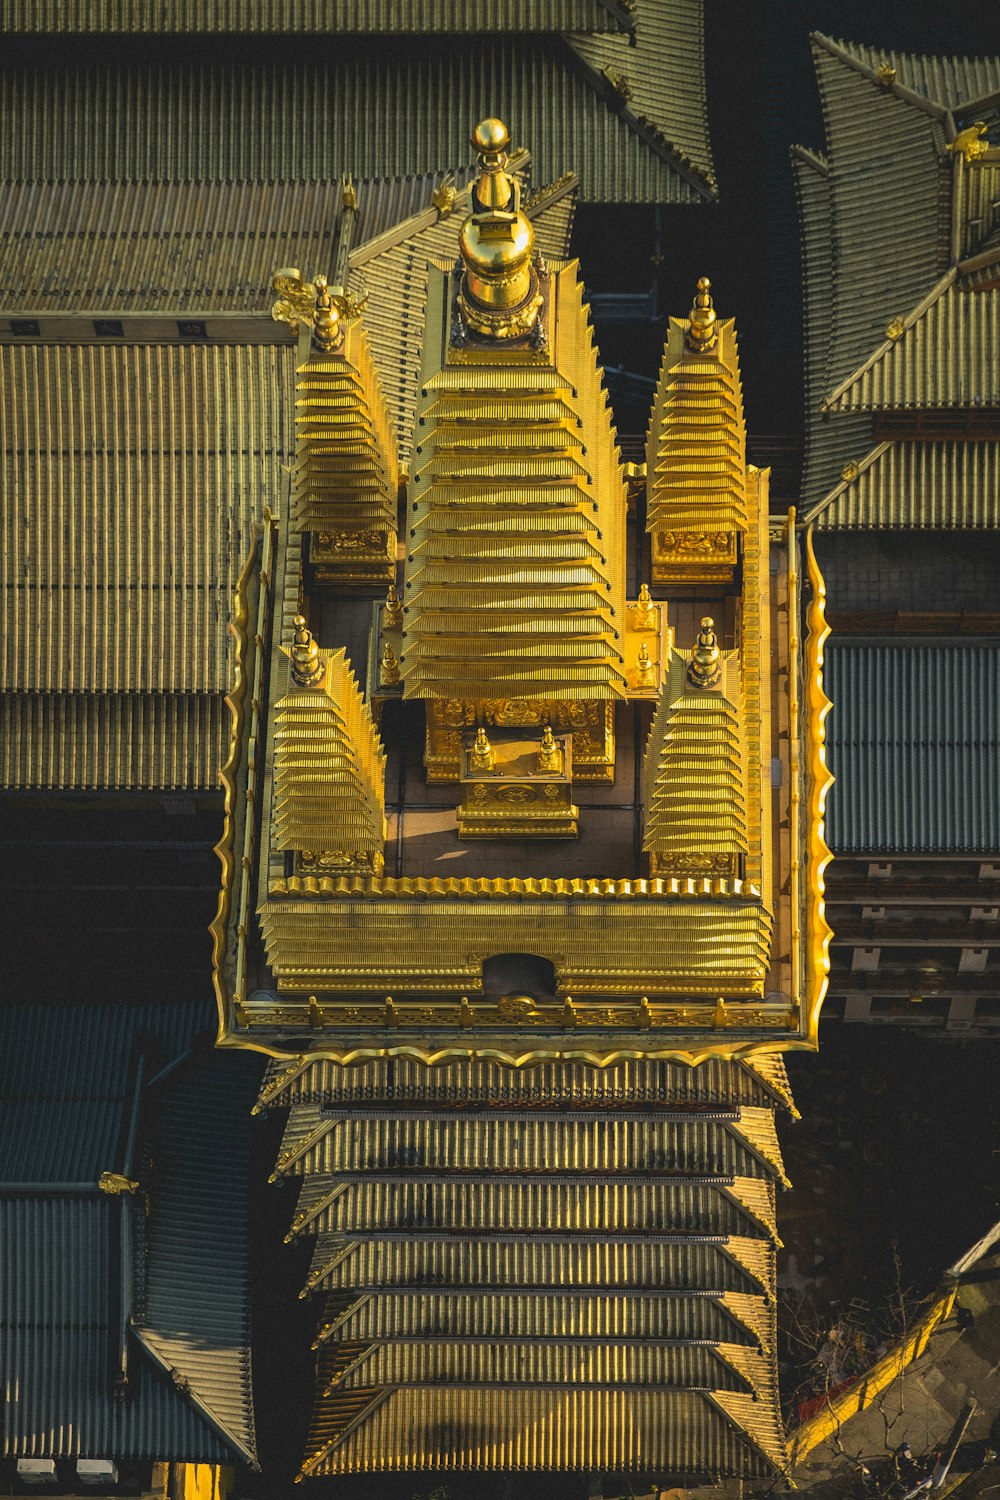 gold tower